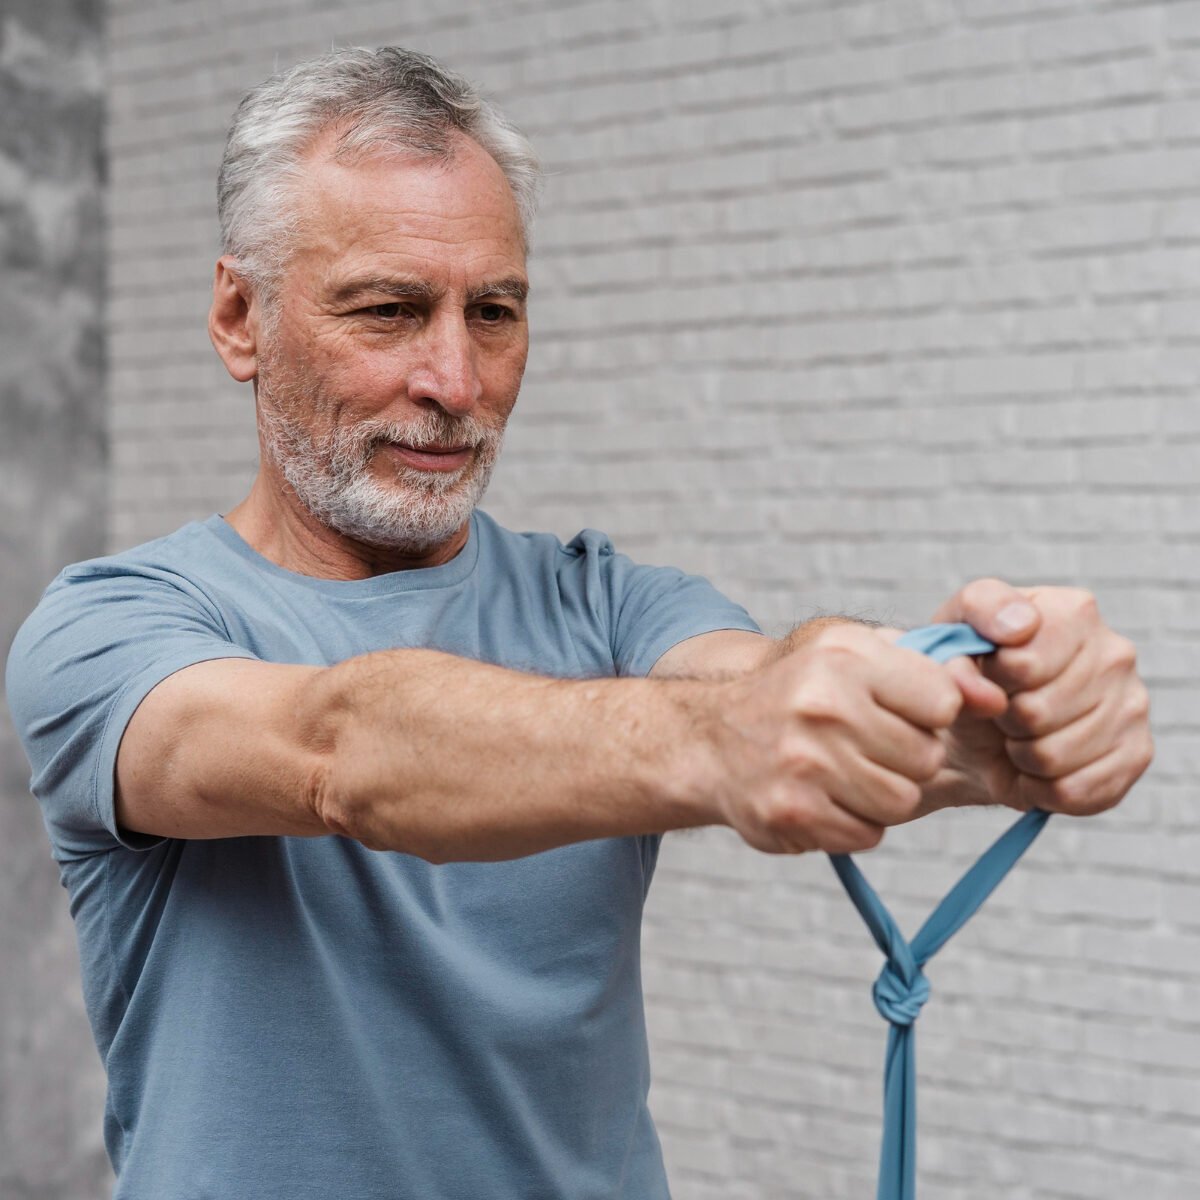 10 Resistance Bands Exercises For Seniors: Improve Strength And Mobility With These Simple Workouts